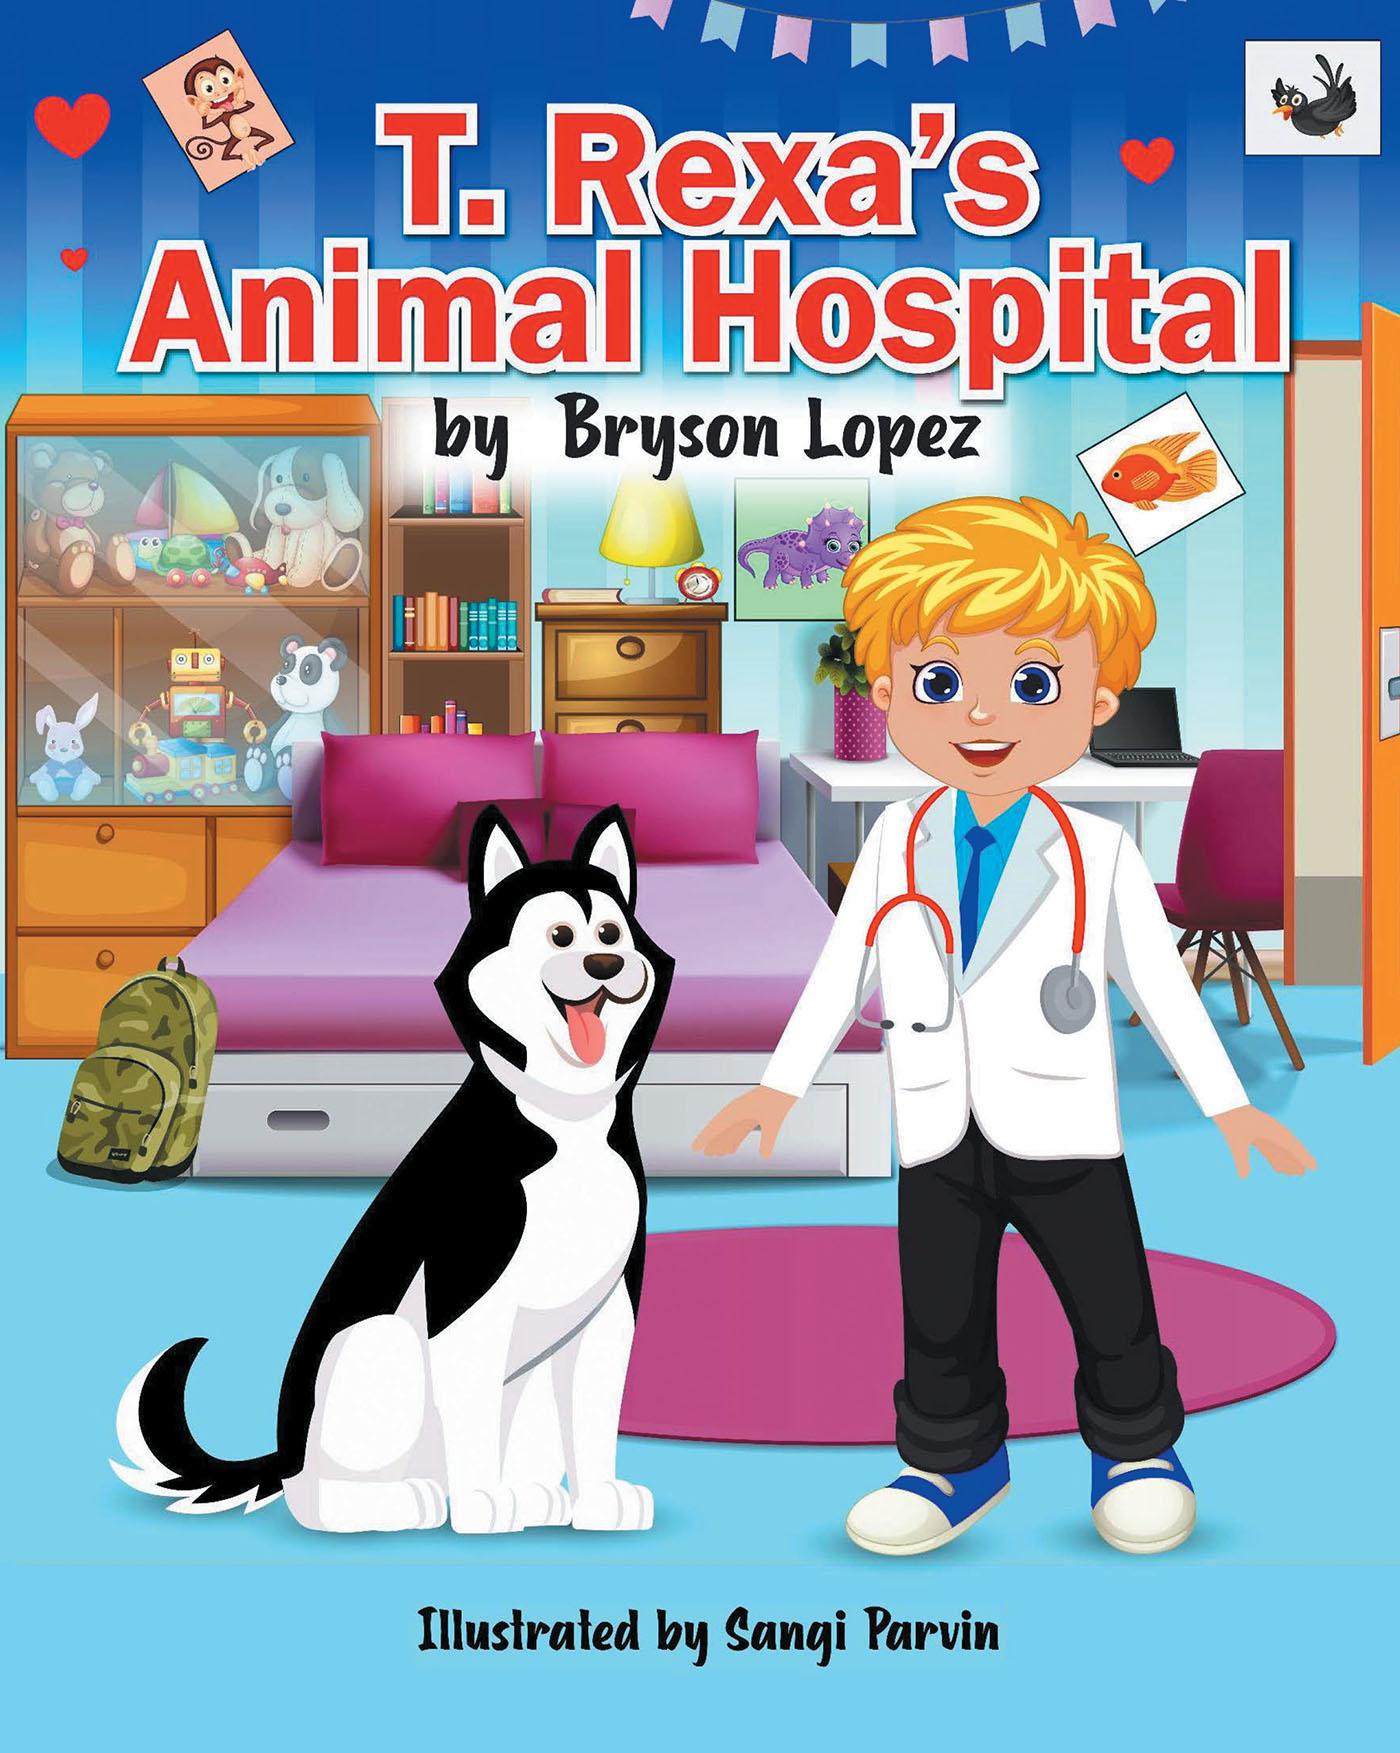 Author Bryson Lopez’s New Book, "T. Rexa’s Animal Hospital," is a Lighthearted and Educational Book Ideal for Young Animal Lovers